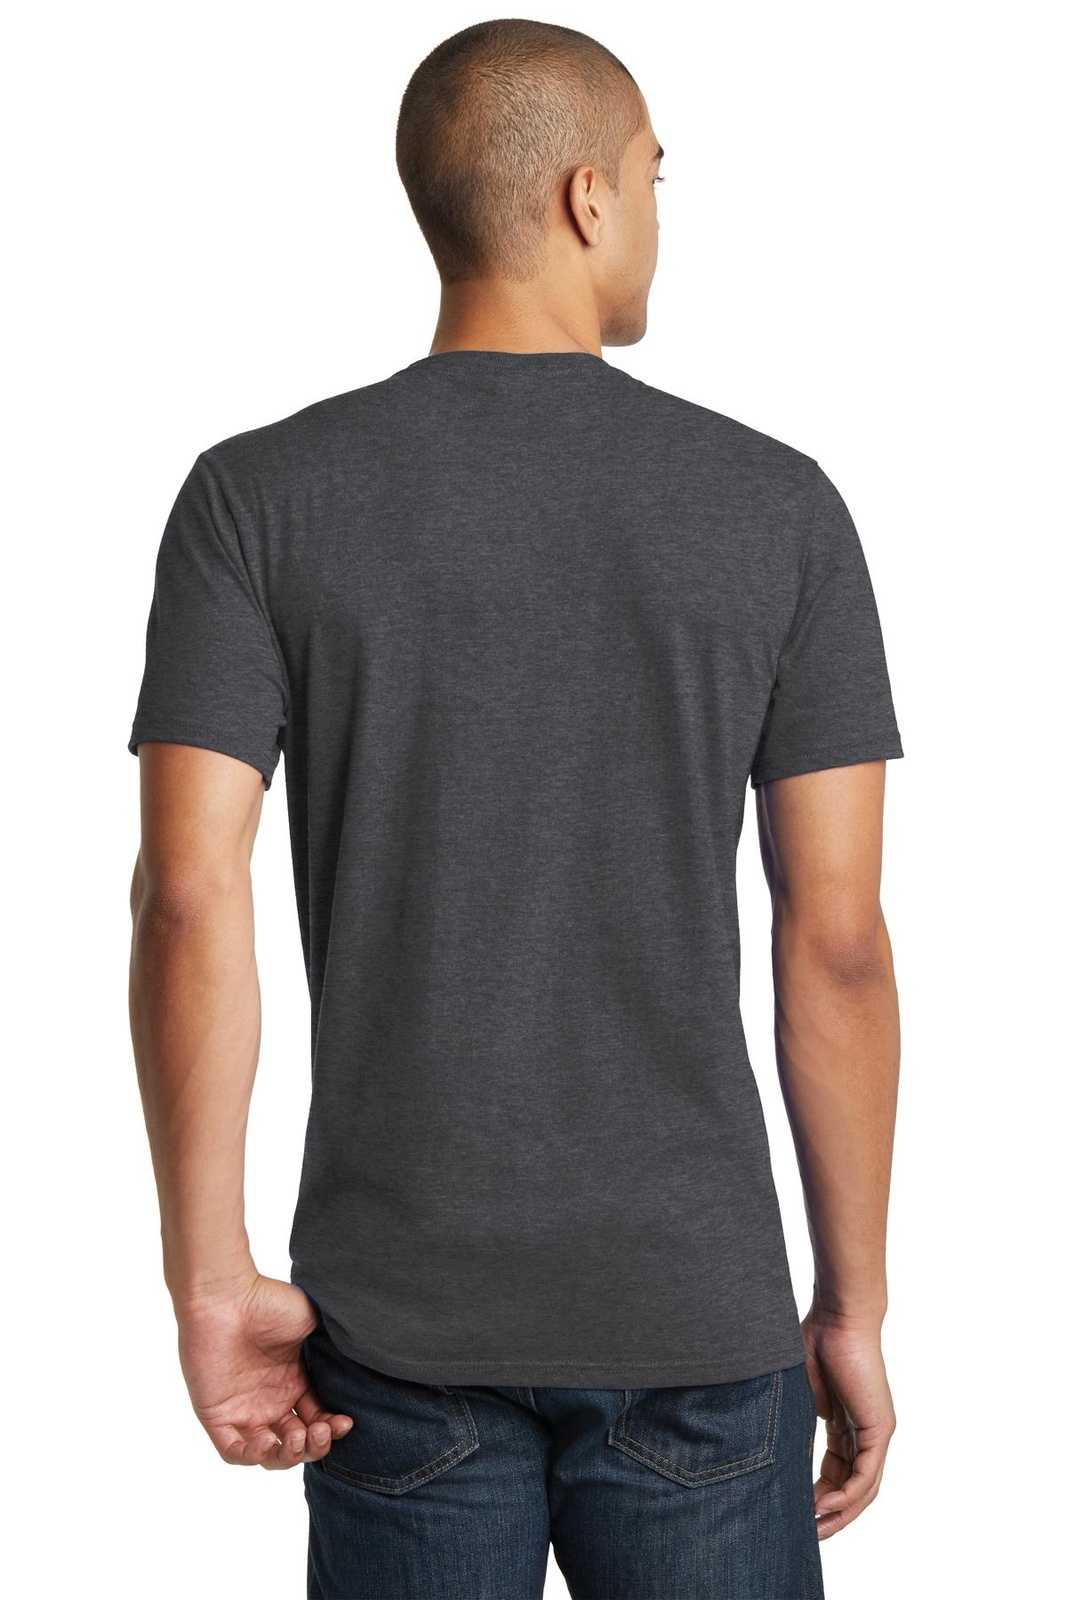 District DT5000 The Concert Tee - Heathered Charcoal - HIT a Double - 2